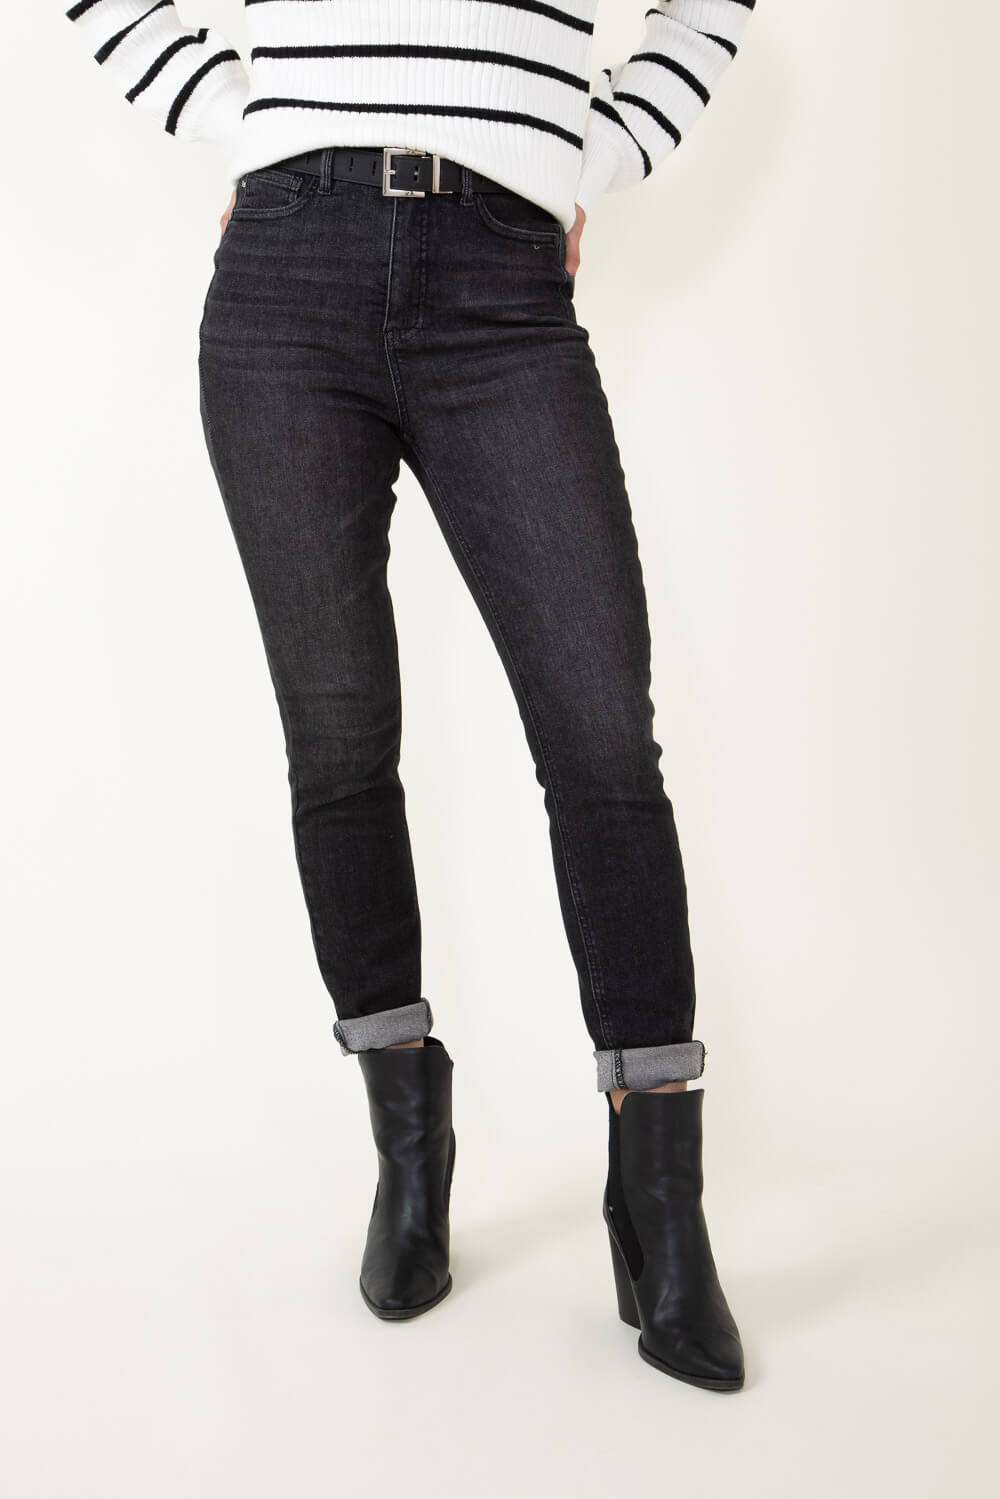 Judy Blue High Rise Tummy Control Skinny Jeans for Women in Black